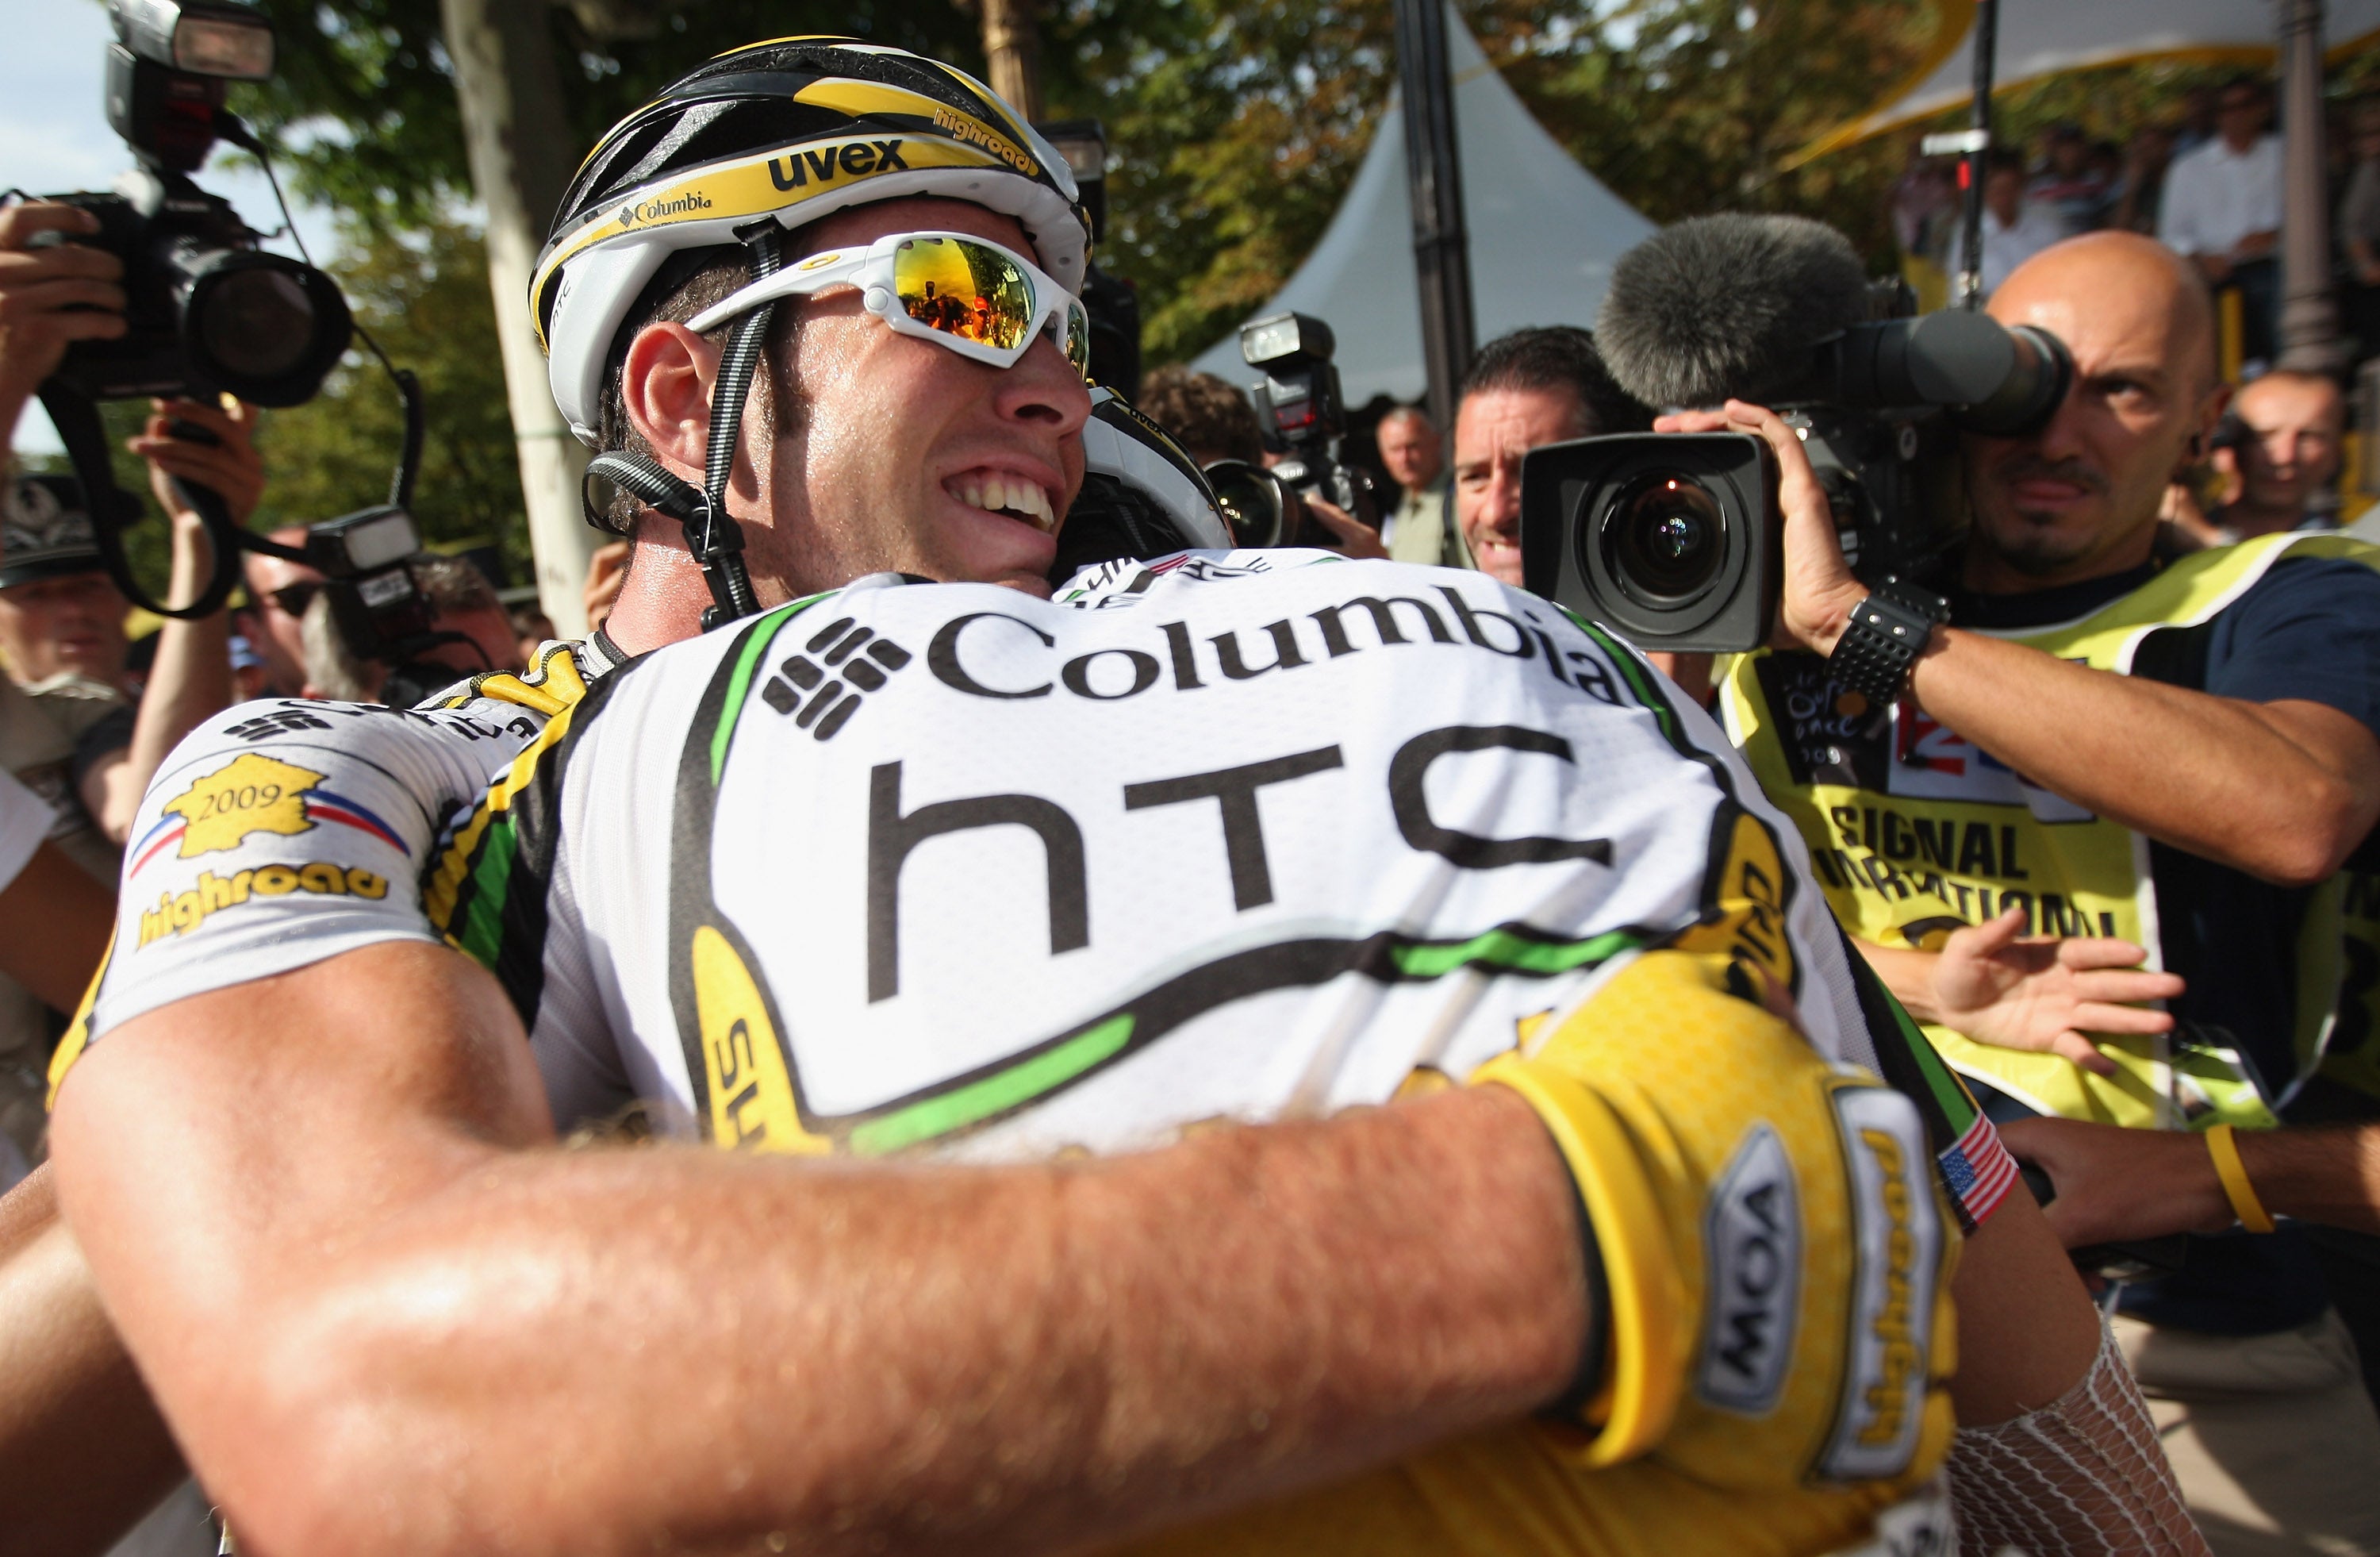 Cavendish and Renshaw embrace after winning the final stage of the 2009 Tour in Paris